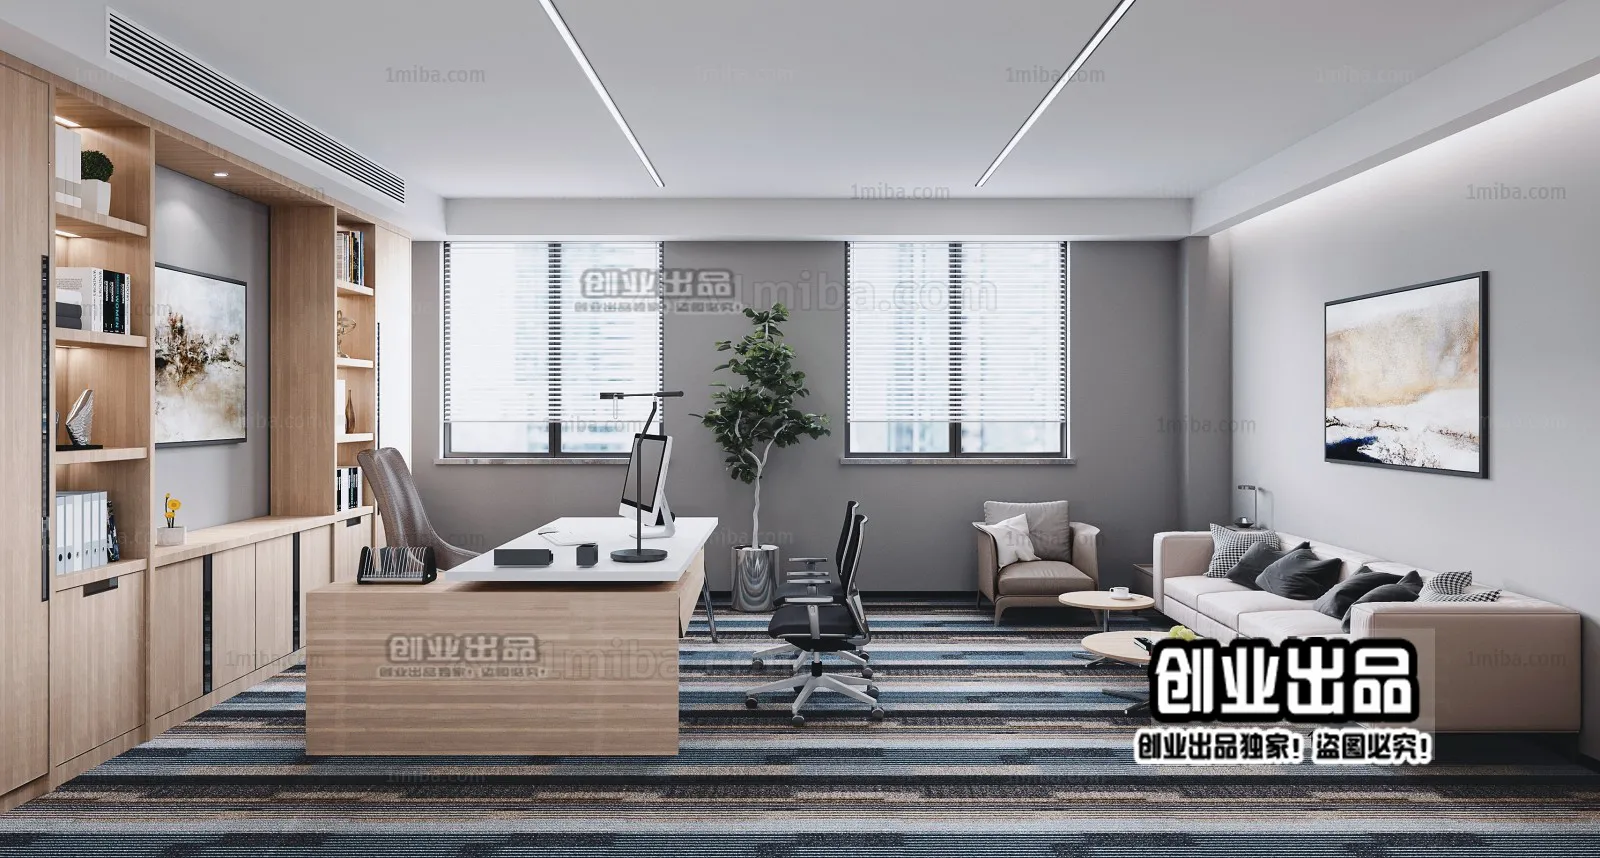 3D OFFICE INTERIOR (VRAY) – MANAGER ROOM 3D SCENES – 026